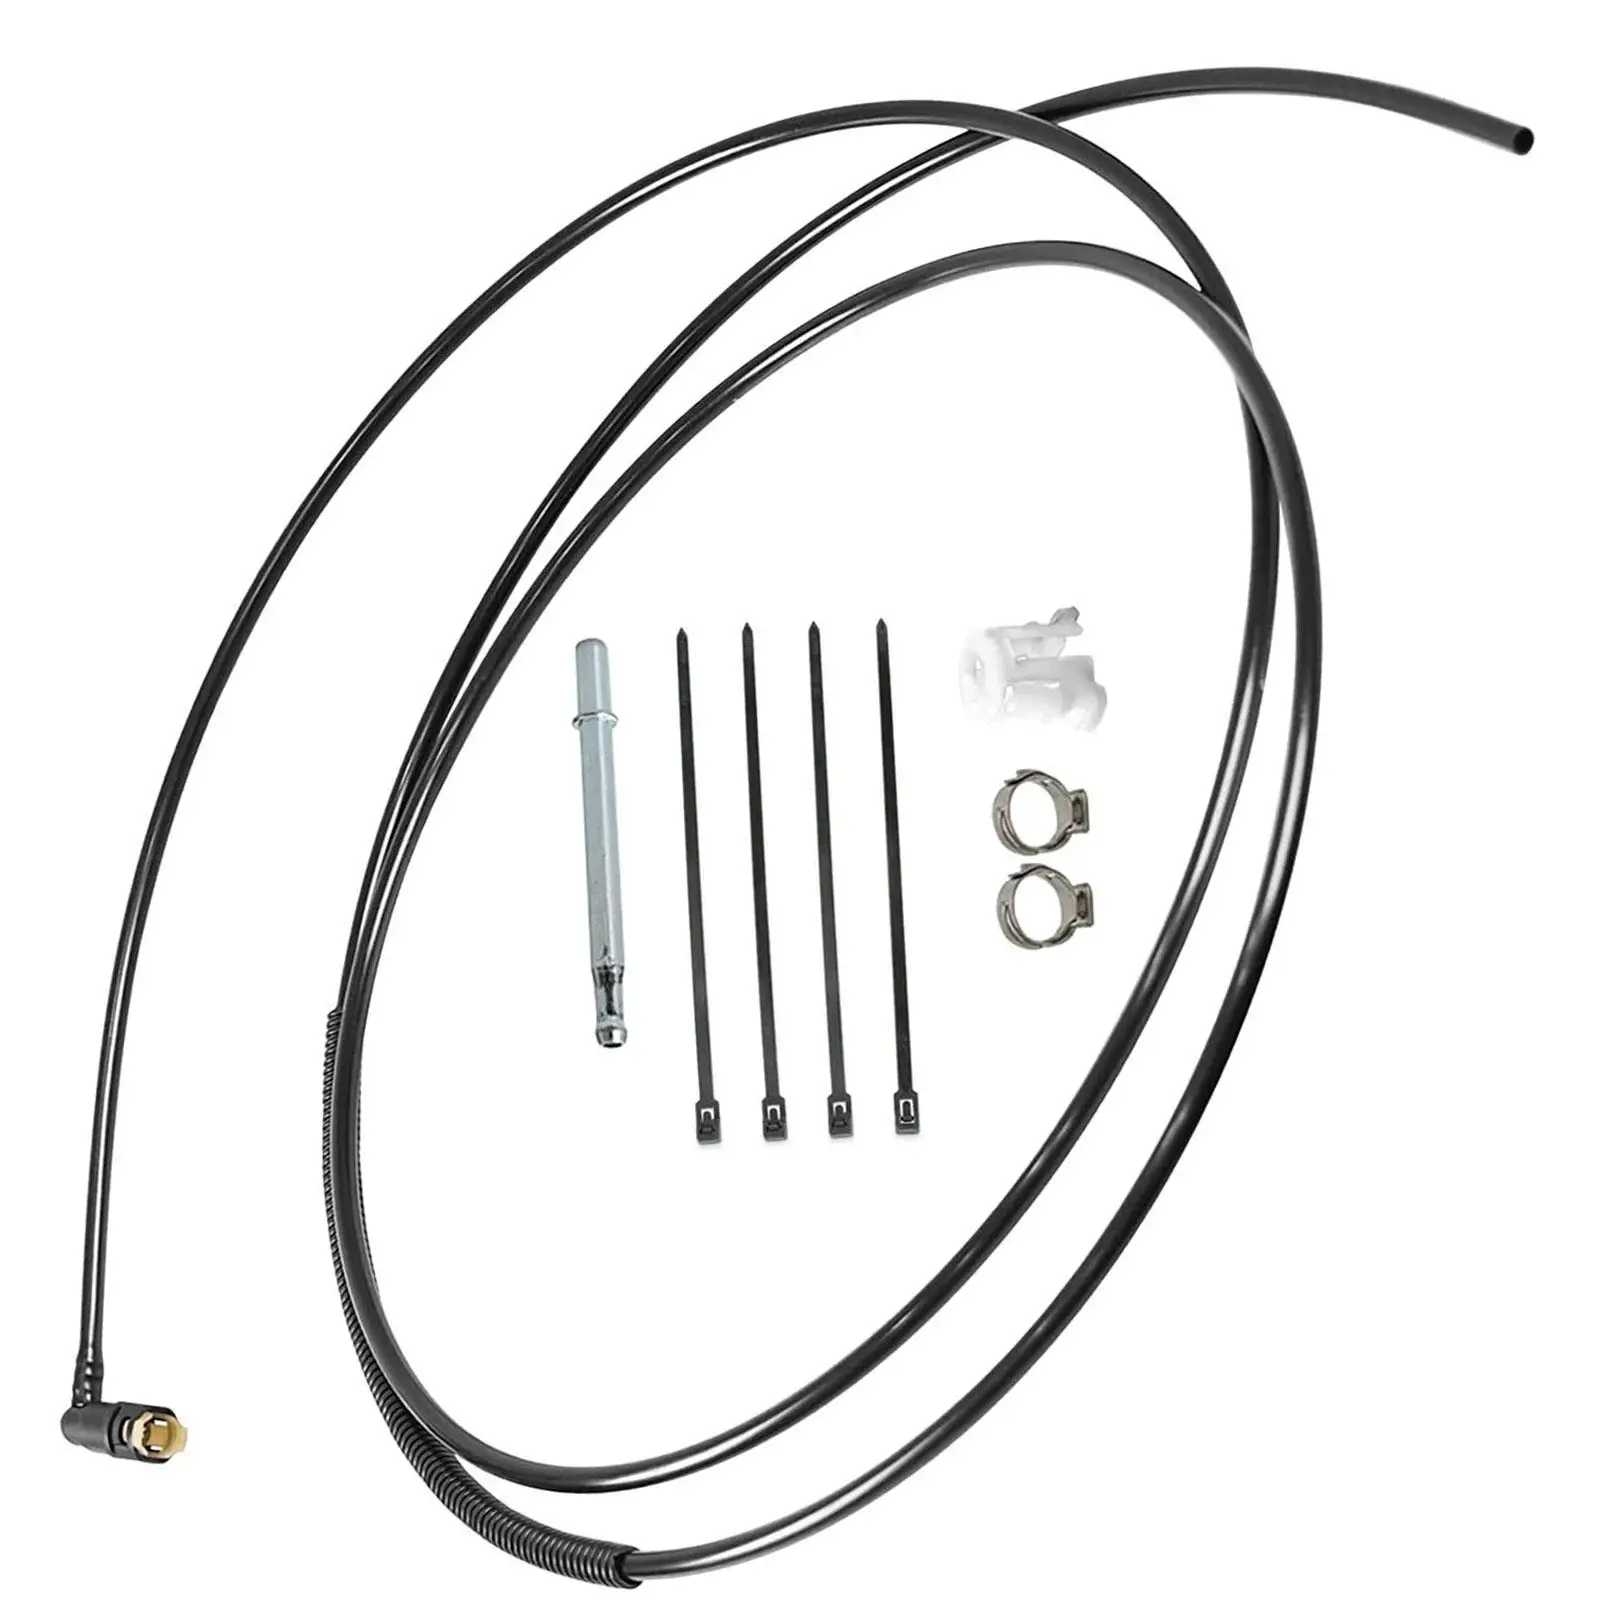 Gas Fuel Line Fl-Fg0212 Spare Parts Replaces High performance Car Accessories for Dodge RAM Pick up 1500 2500 3500